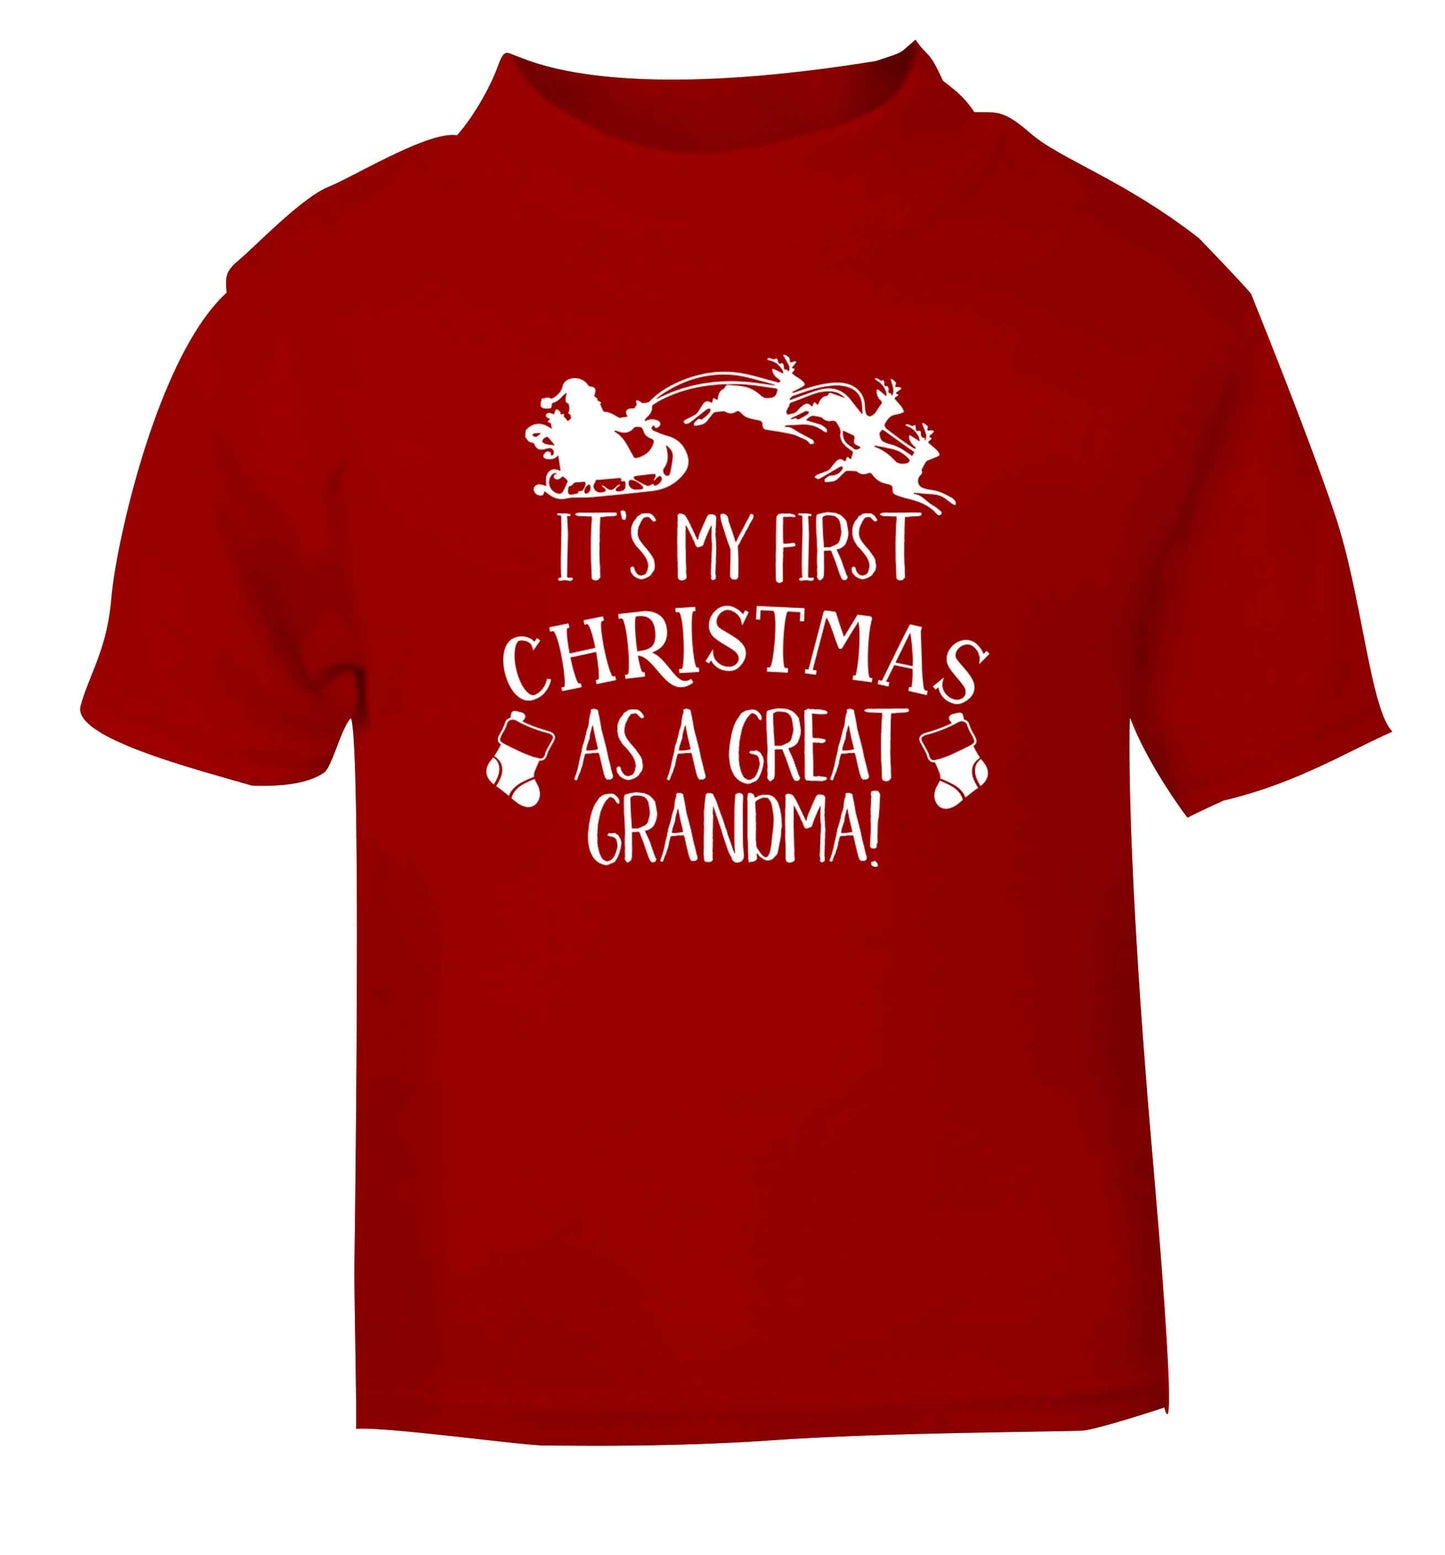 It's my first Christmas as a great grandma! red Baby Toddler Tshirt 2 Years